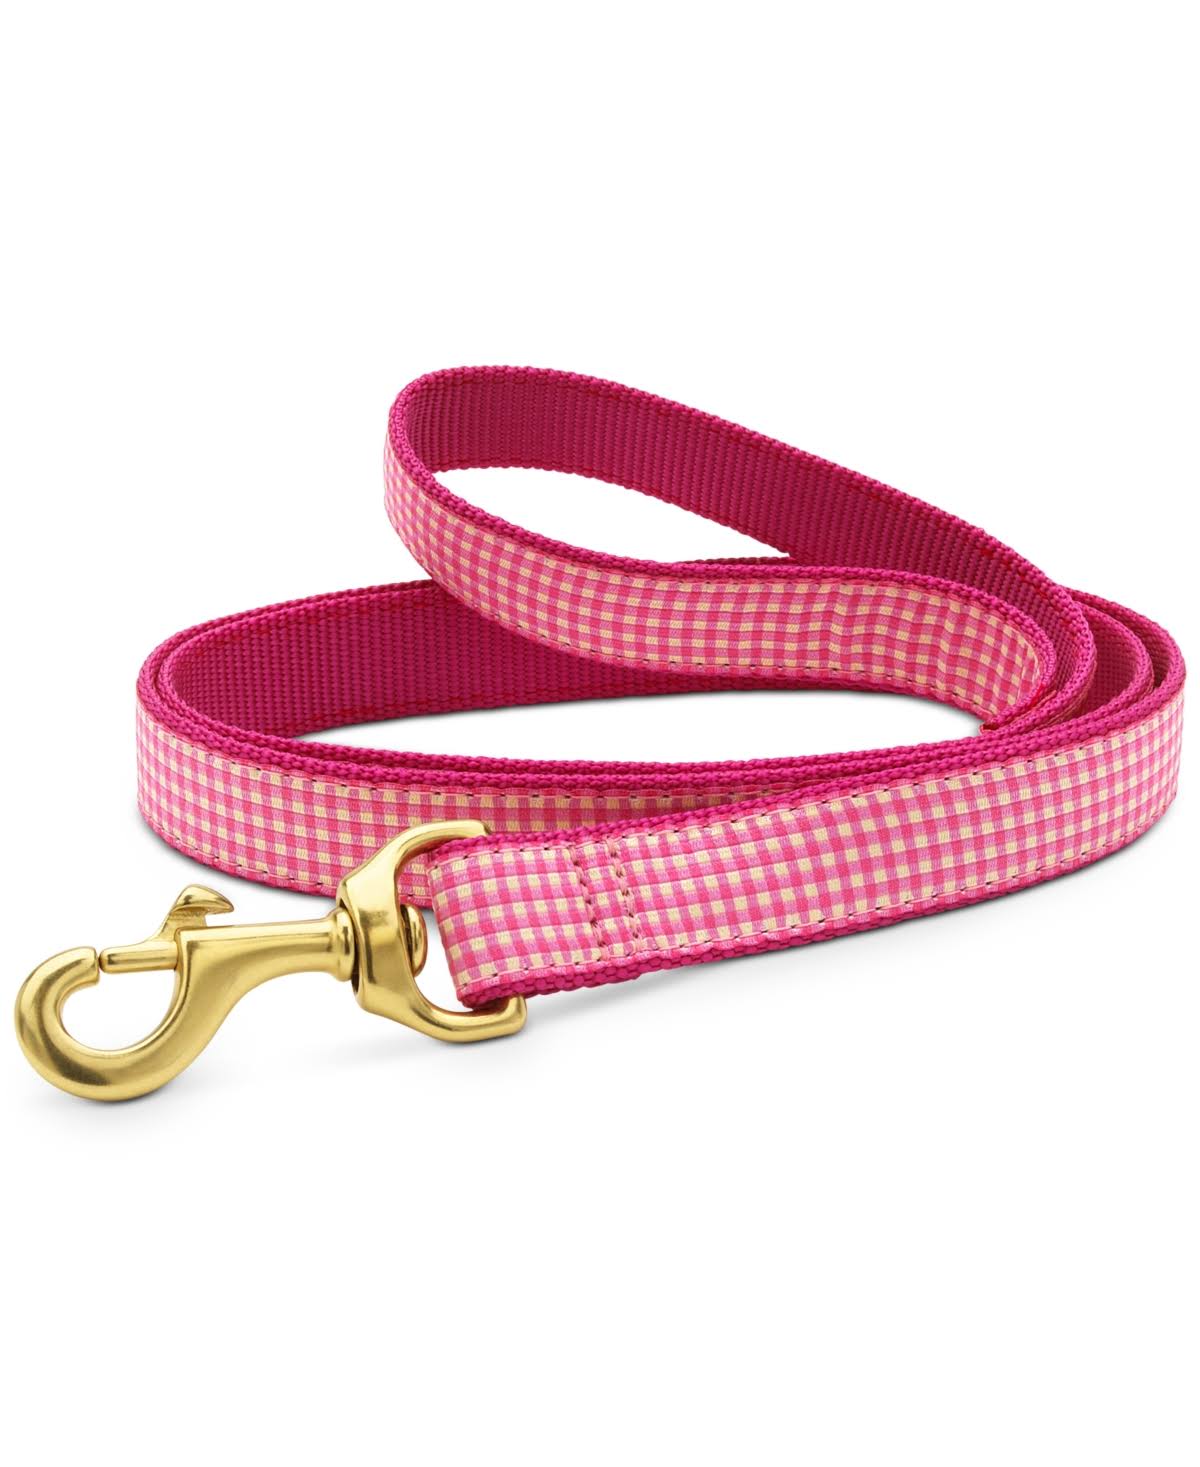 Up Country Pink Gingham Dog Leash 6-ft Wide